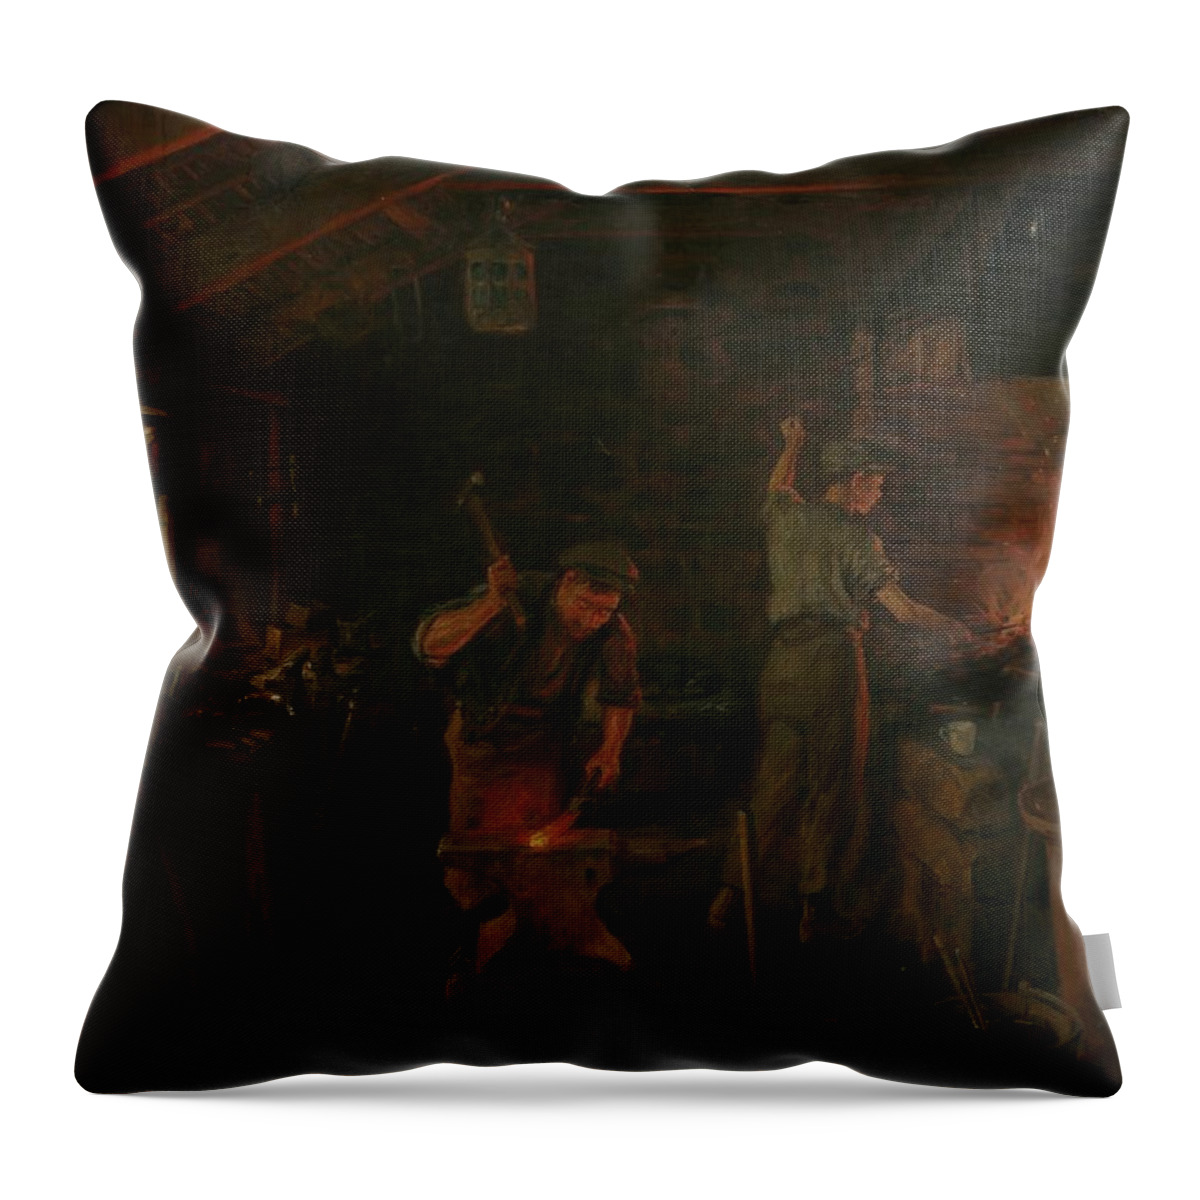 Interior Throw Pillow featuring the painting By Hammer and Hand all Arts doth Stand by William Banks Fortescue